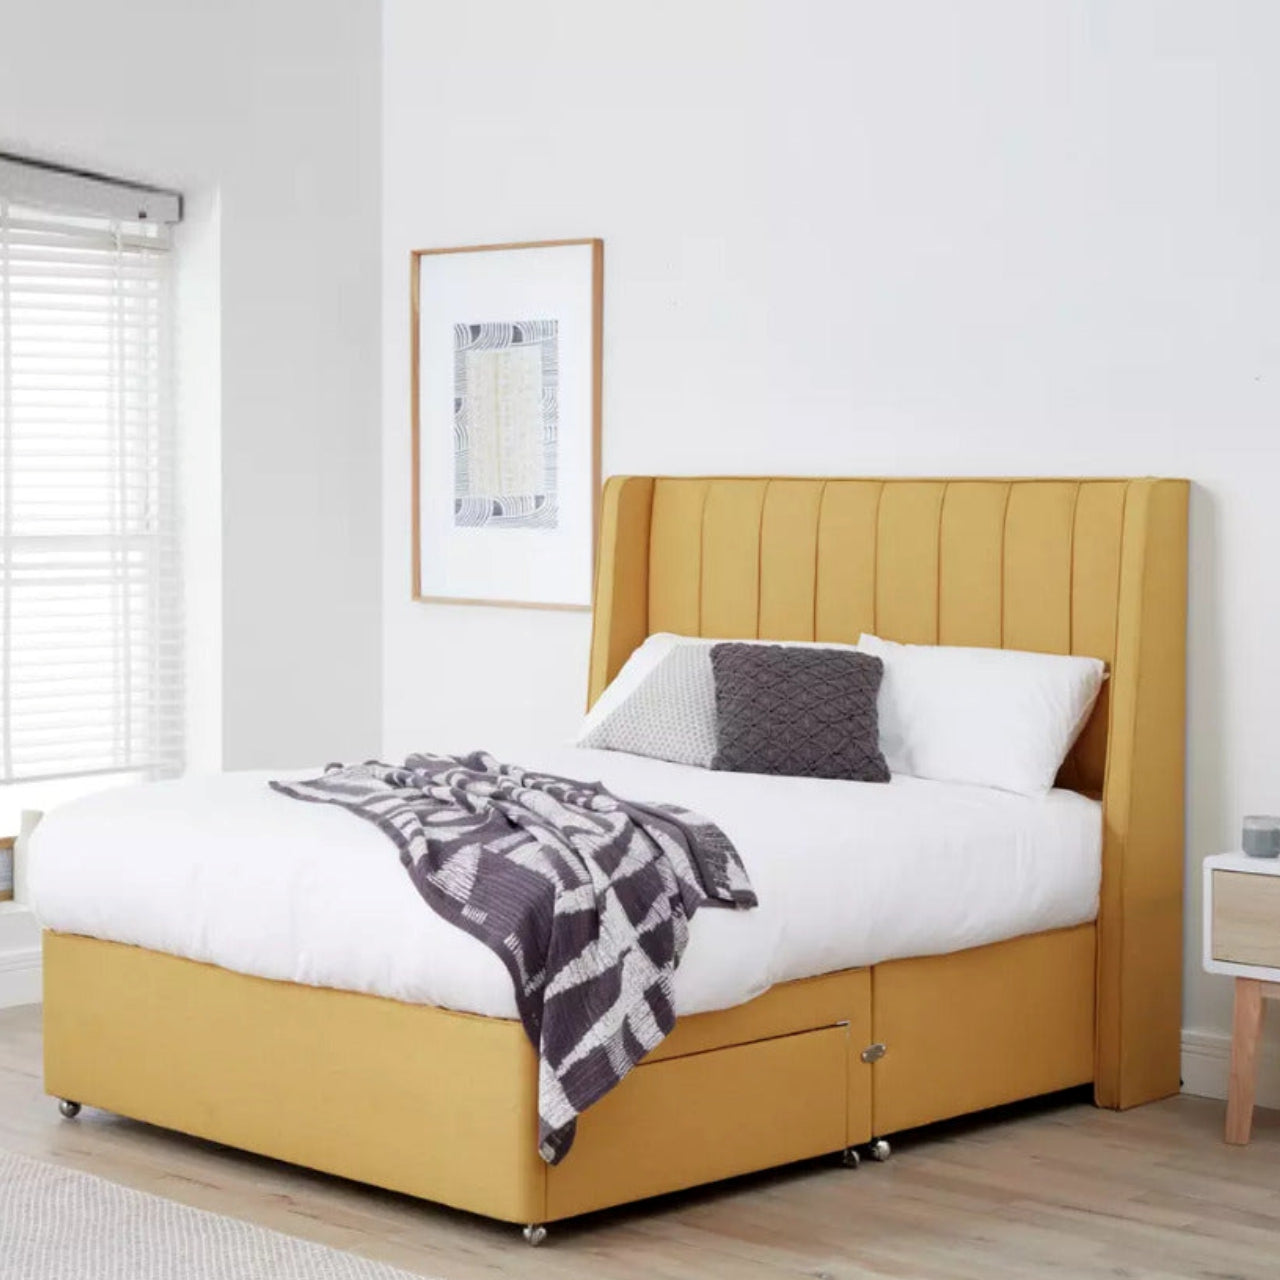 Double Bed Design